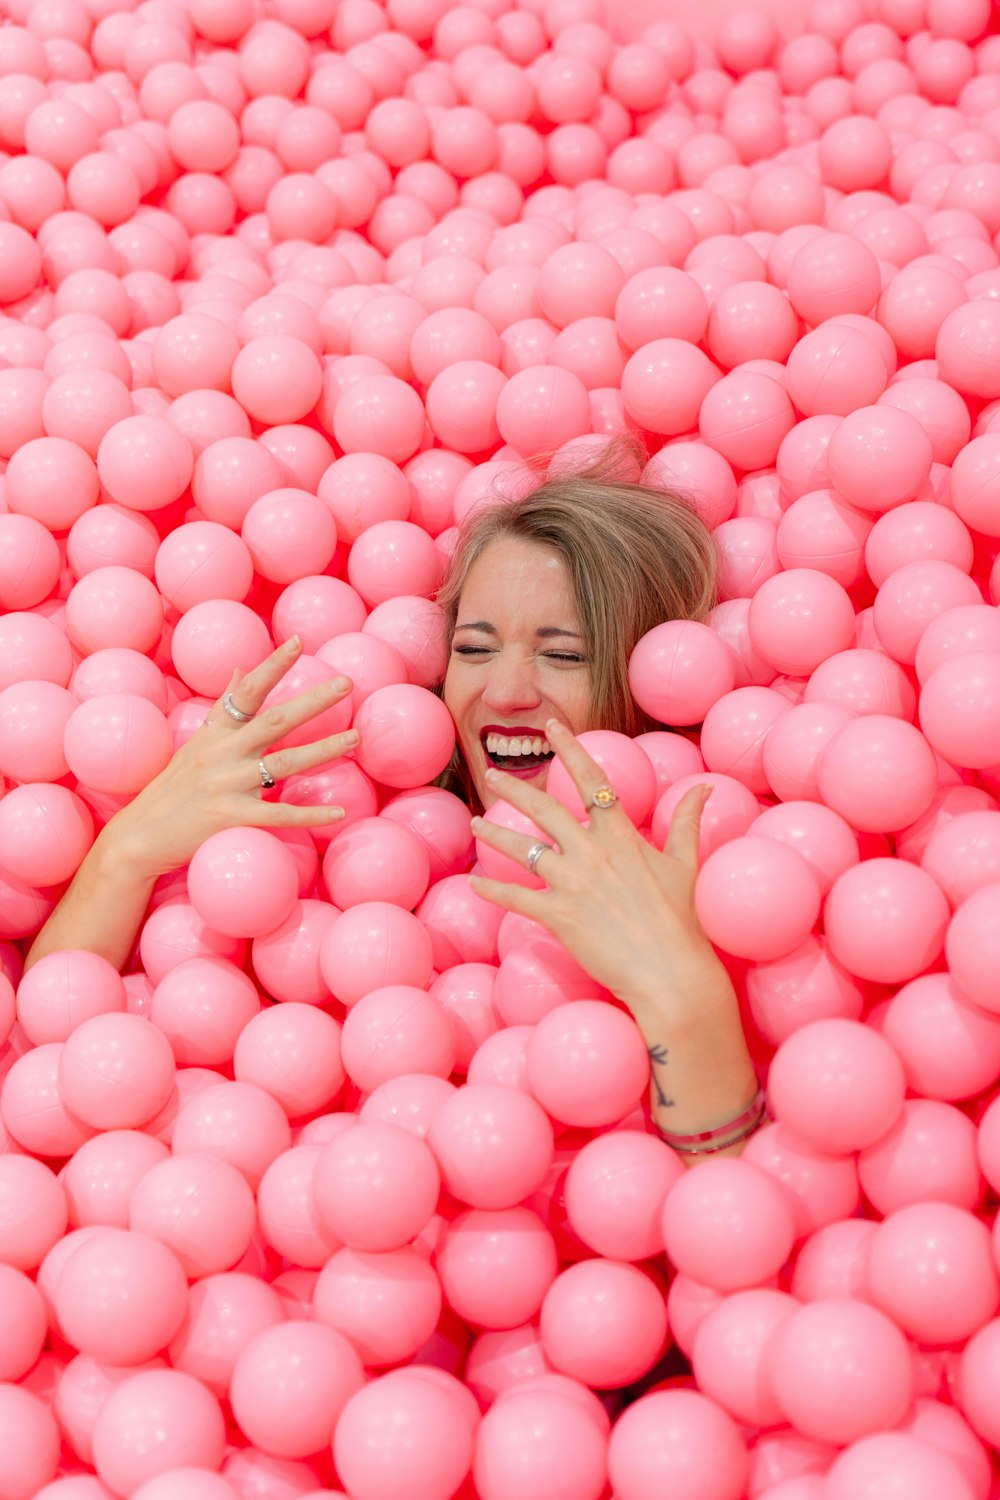 blonde haired woman lying on pink round balls